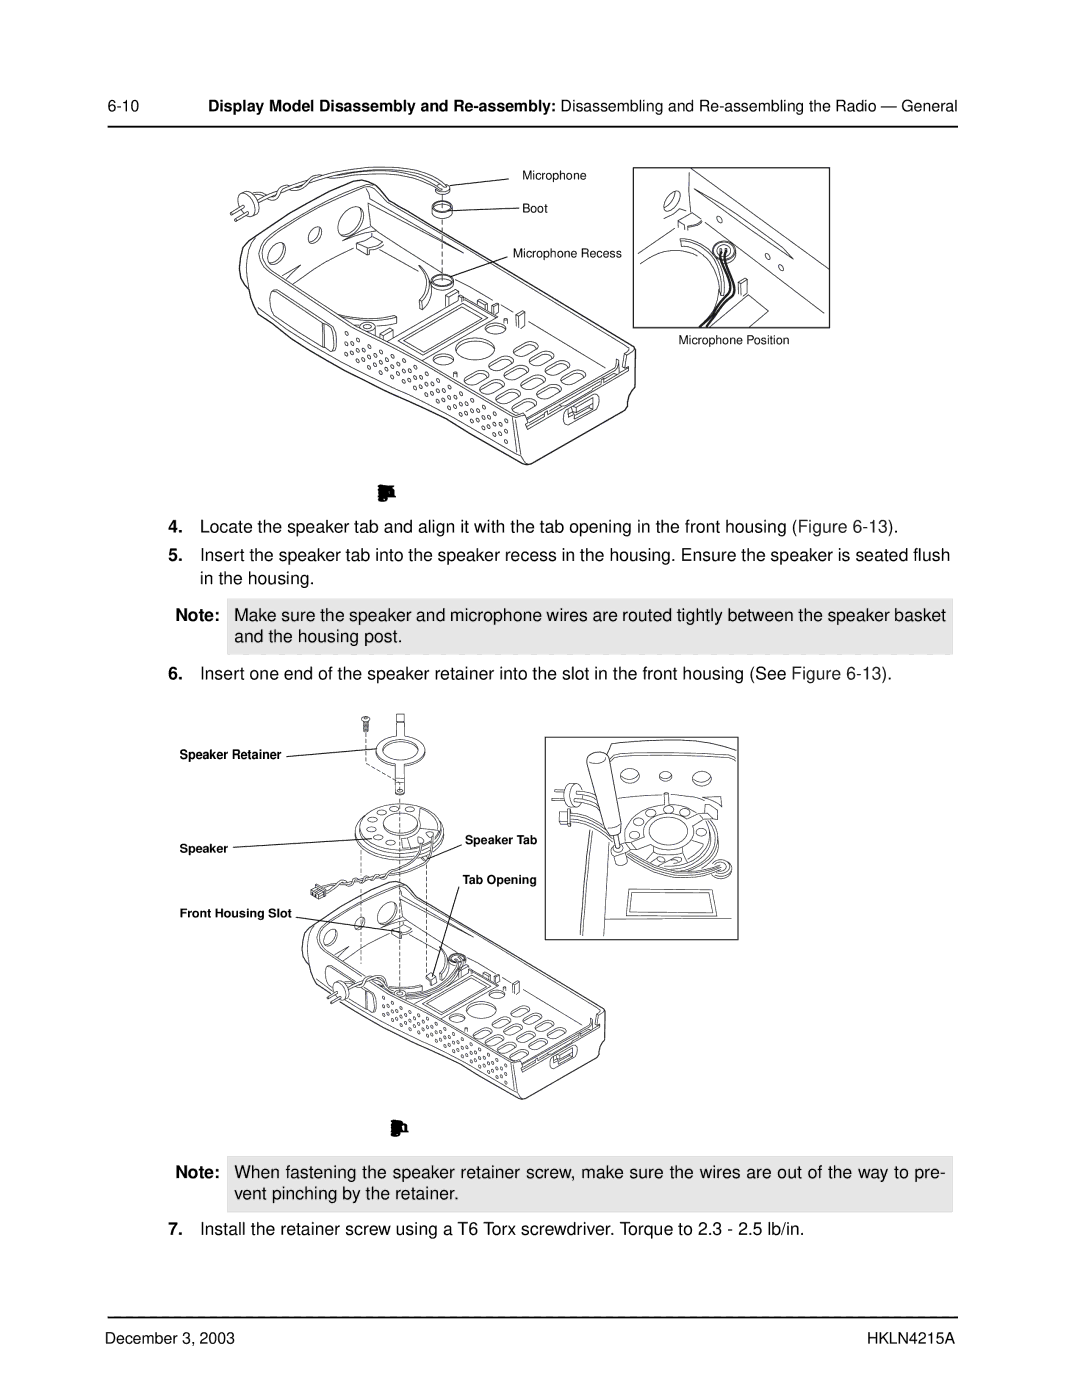 Motorola EP450 service manual Microphone Re-assembly 